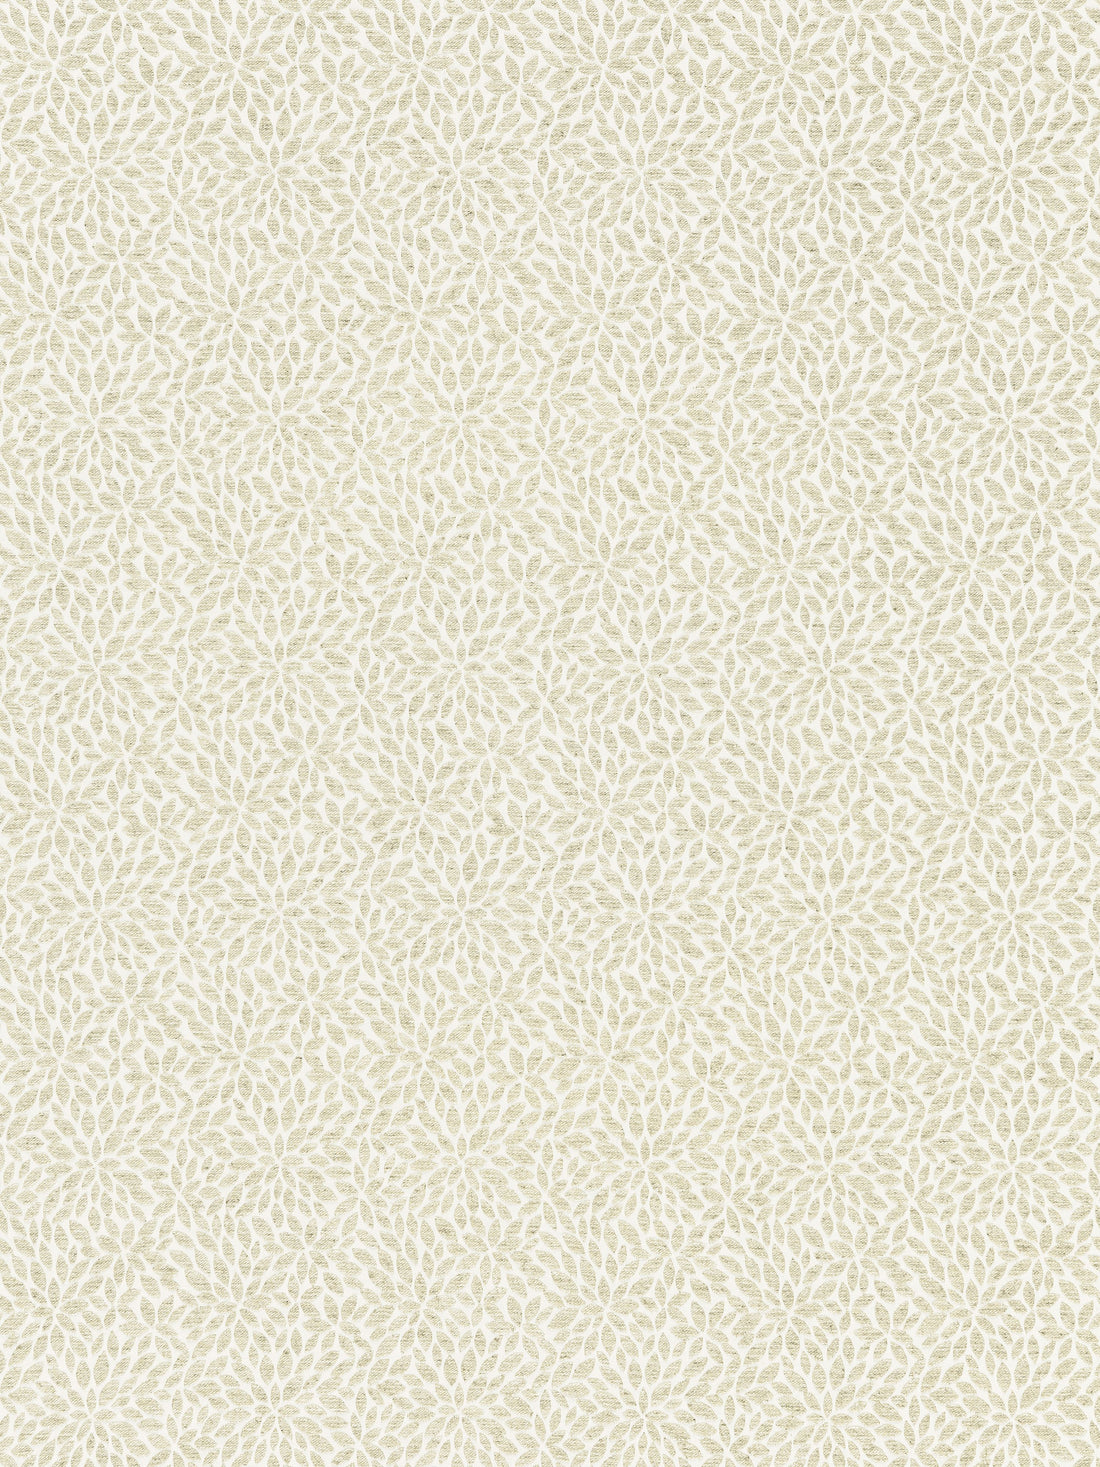 Risa Weave fabric in birch color - pattern number SC 000127239 - by Scalamandre in the Scalamandre Fabrics Book 1 collection